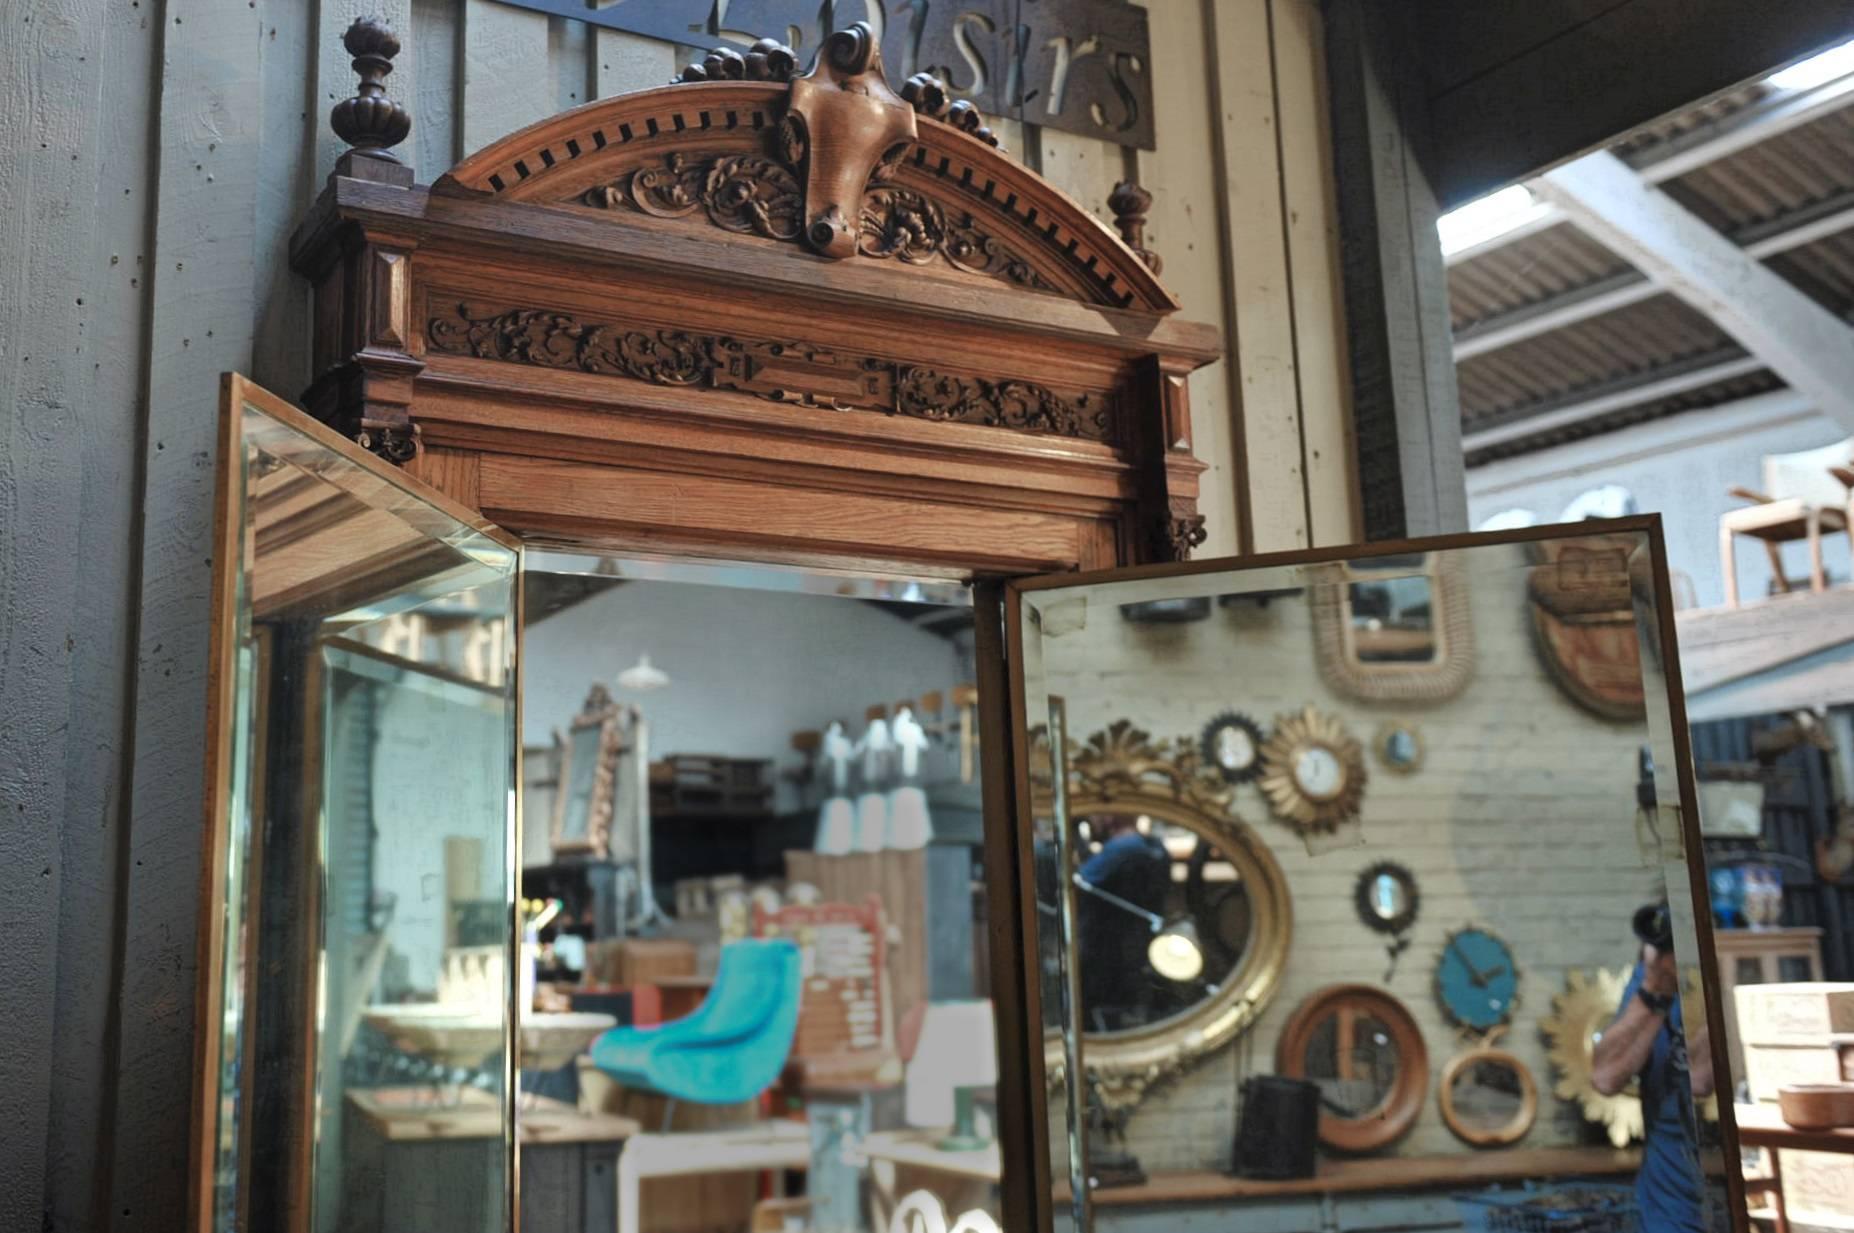 Early 20th Century Miroir Brot French Triptyque Floor Mirror Solid Oak and Brass Door, circa 1900